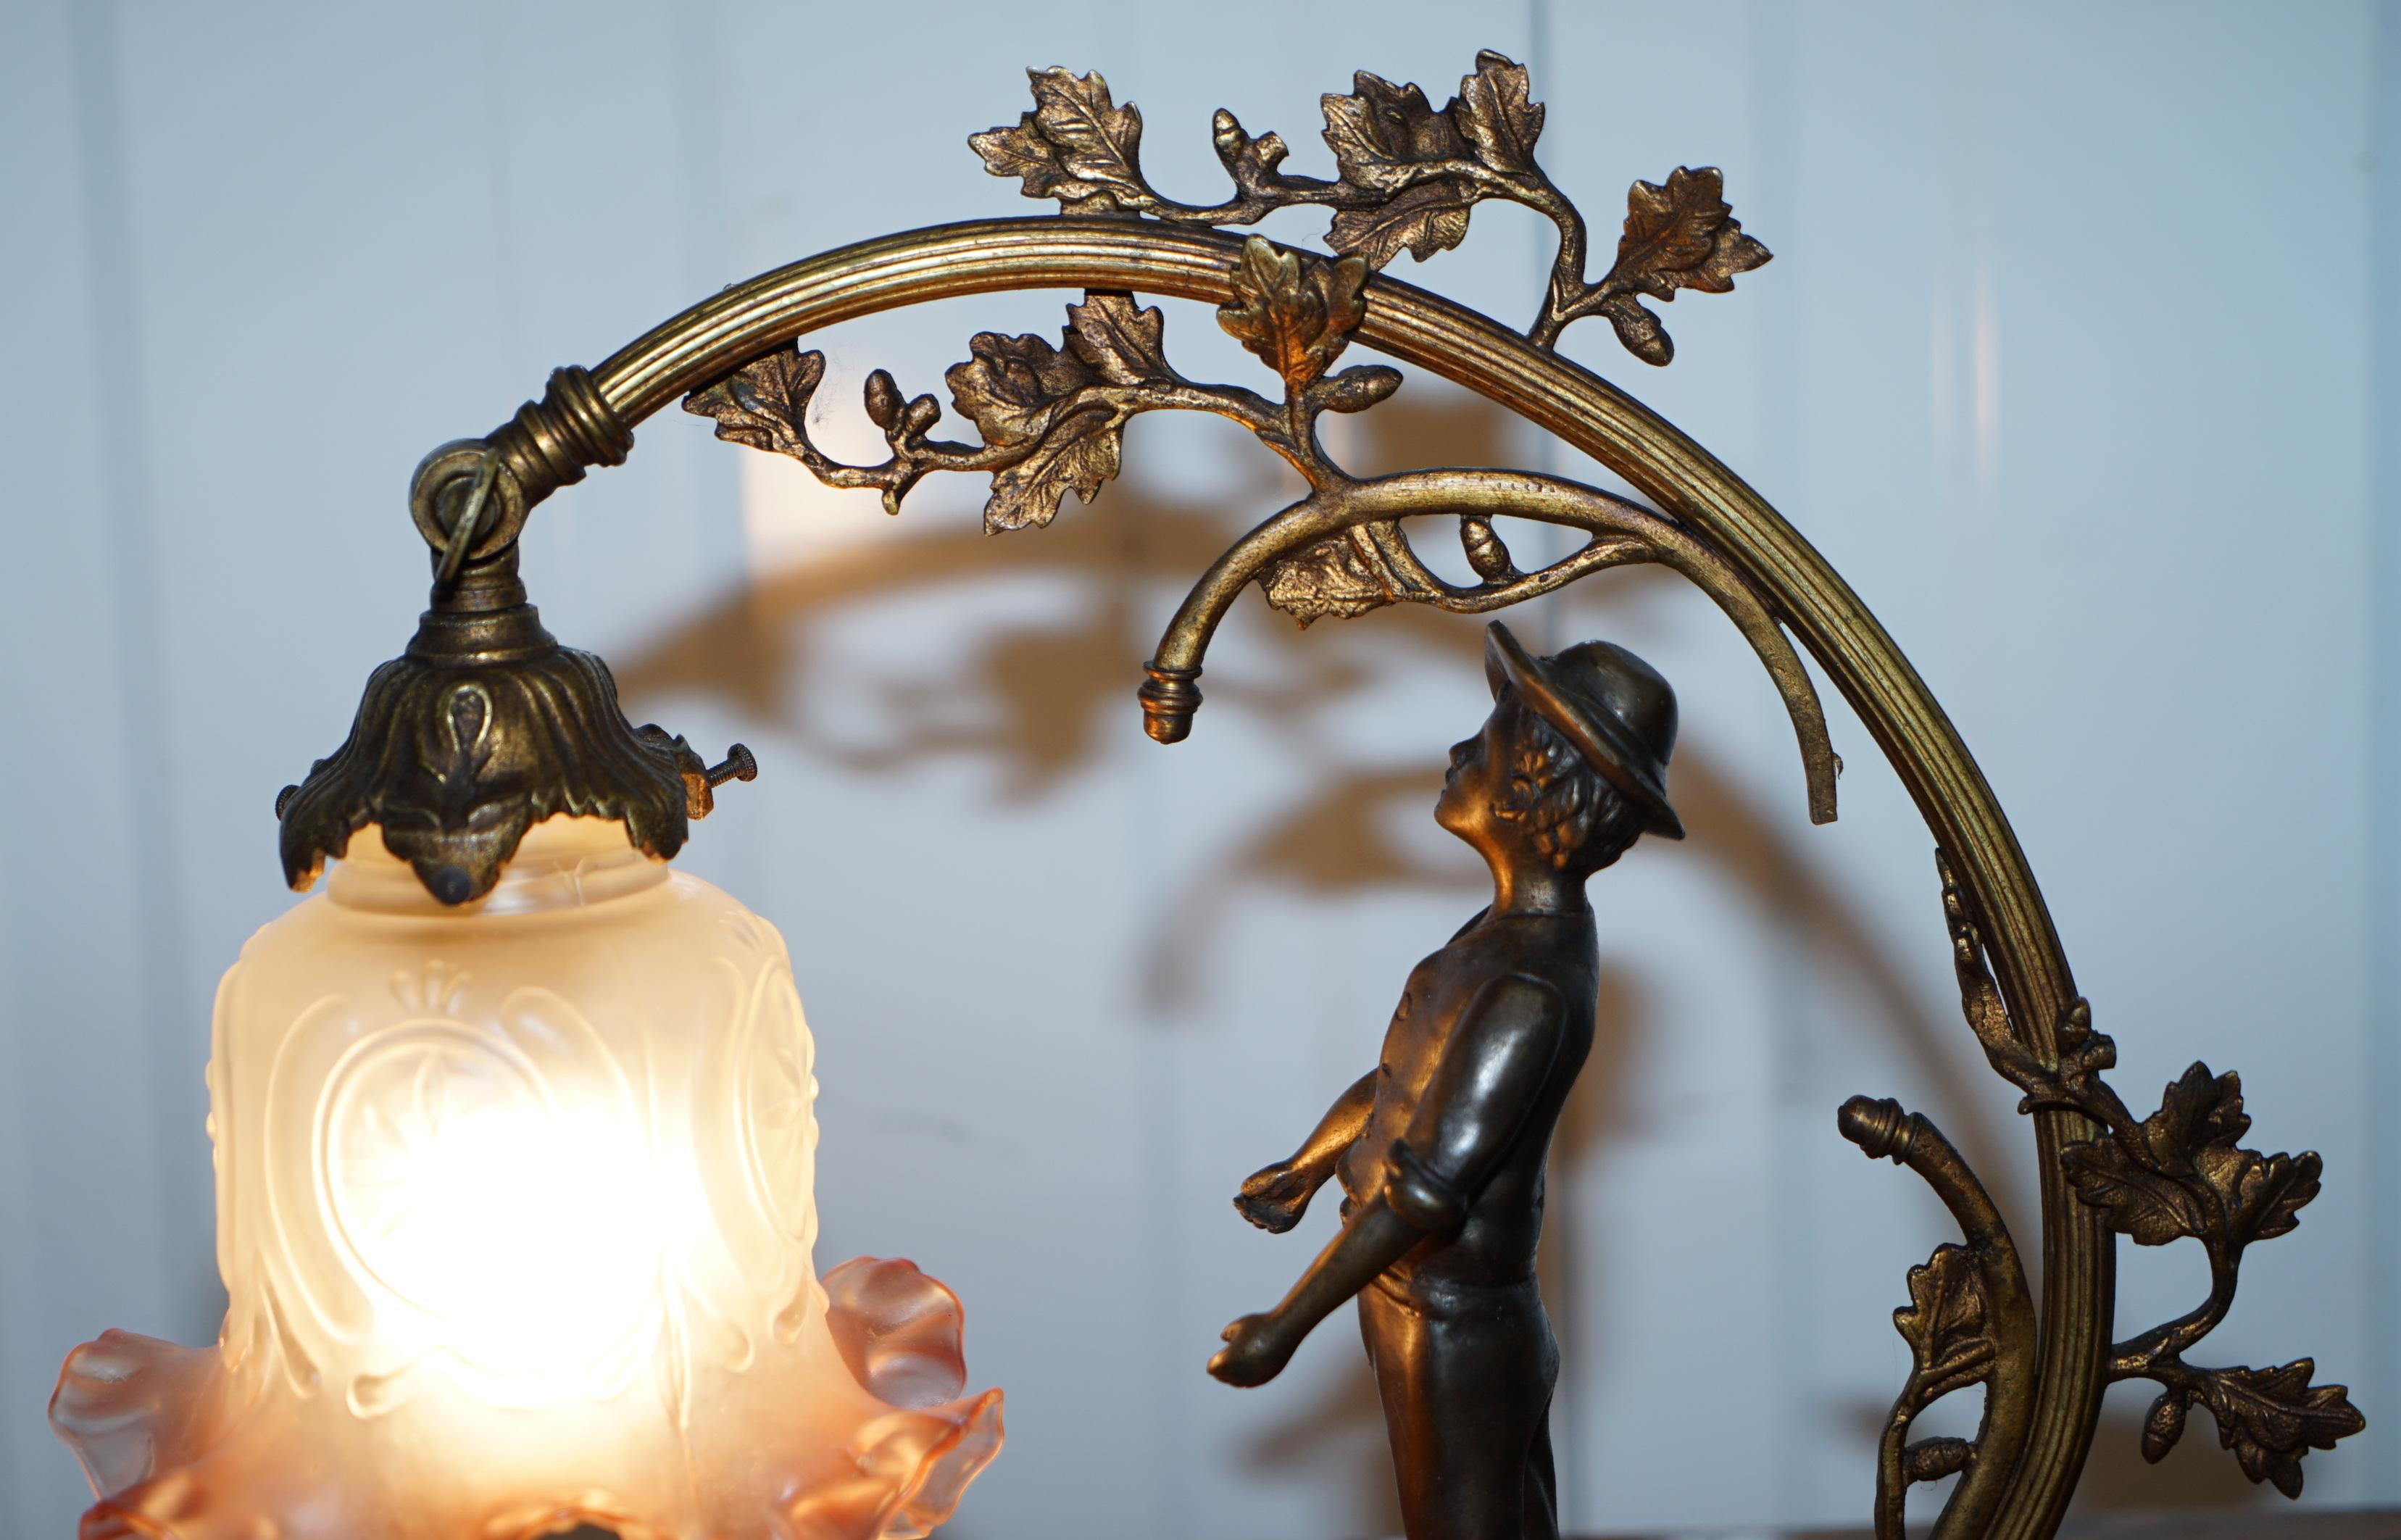 Stunning Solid Bronze circa 1920 Table Lamp with Statue Original Shade Rare Find 3